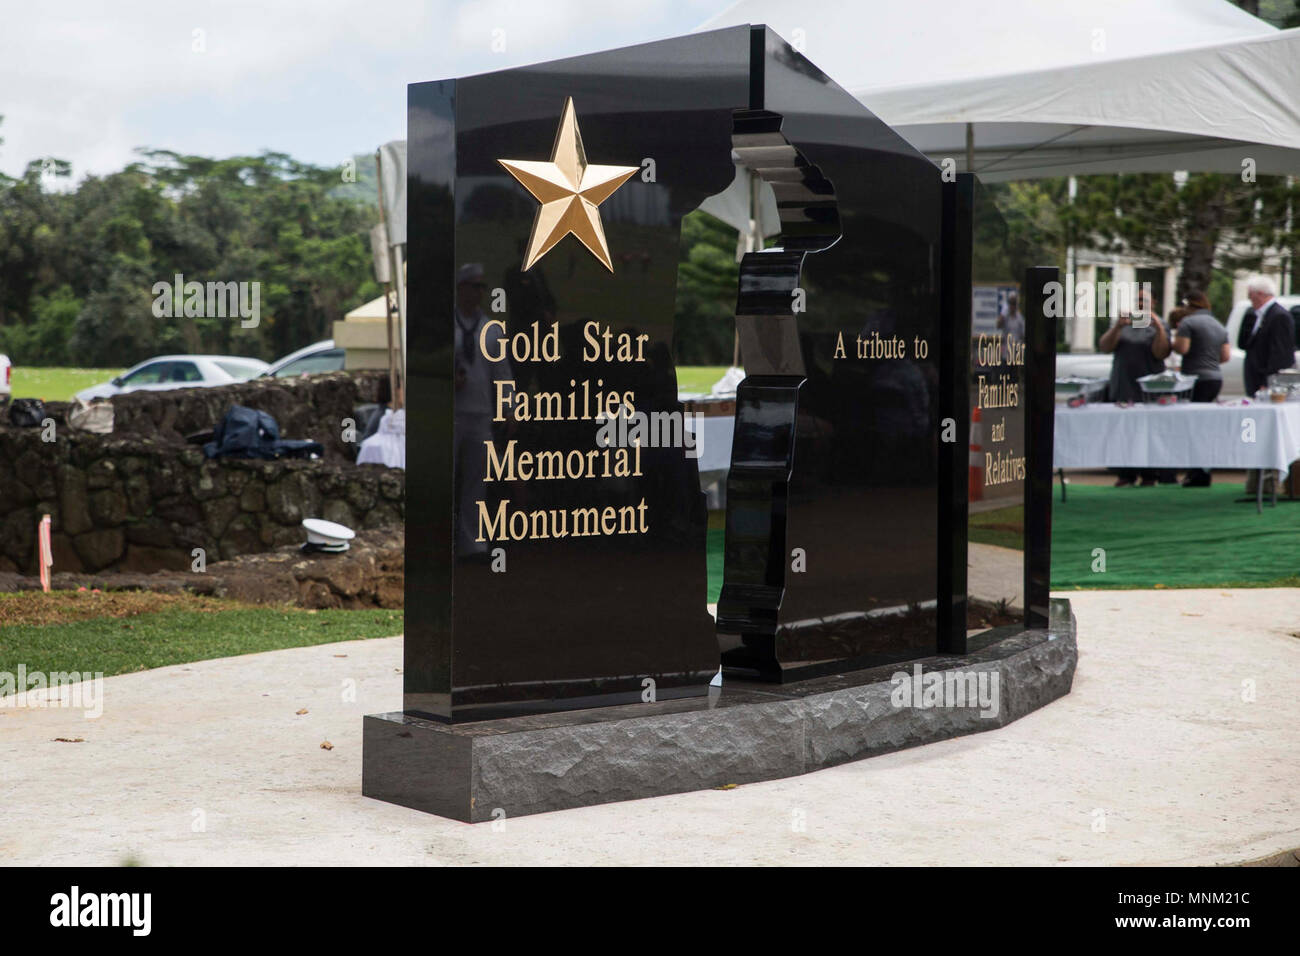 A dedication ceremony is held for the opening of a memorial monument for Gold Star Families at the Hawaii Memorial Park, Kaneohe, Hawaii, Mar. 17, 2018. Multiple organizations including federal, state and local members helped support the construction of a stone memorial honoring the Gold Star Families who have lost loved ones, while serving in the U.S. military. The Gold Star Families Memorial Monument Foundation was created by WWII Medal of Honor recipient Hershel “Woody” Williams in 2010 to remember families who have made the ultimate sacrifice. Stock Photo